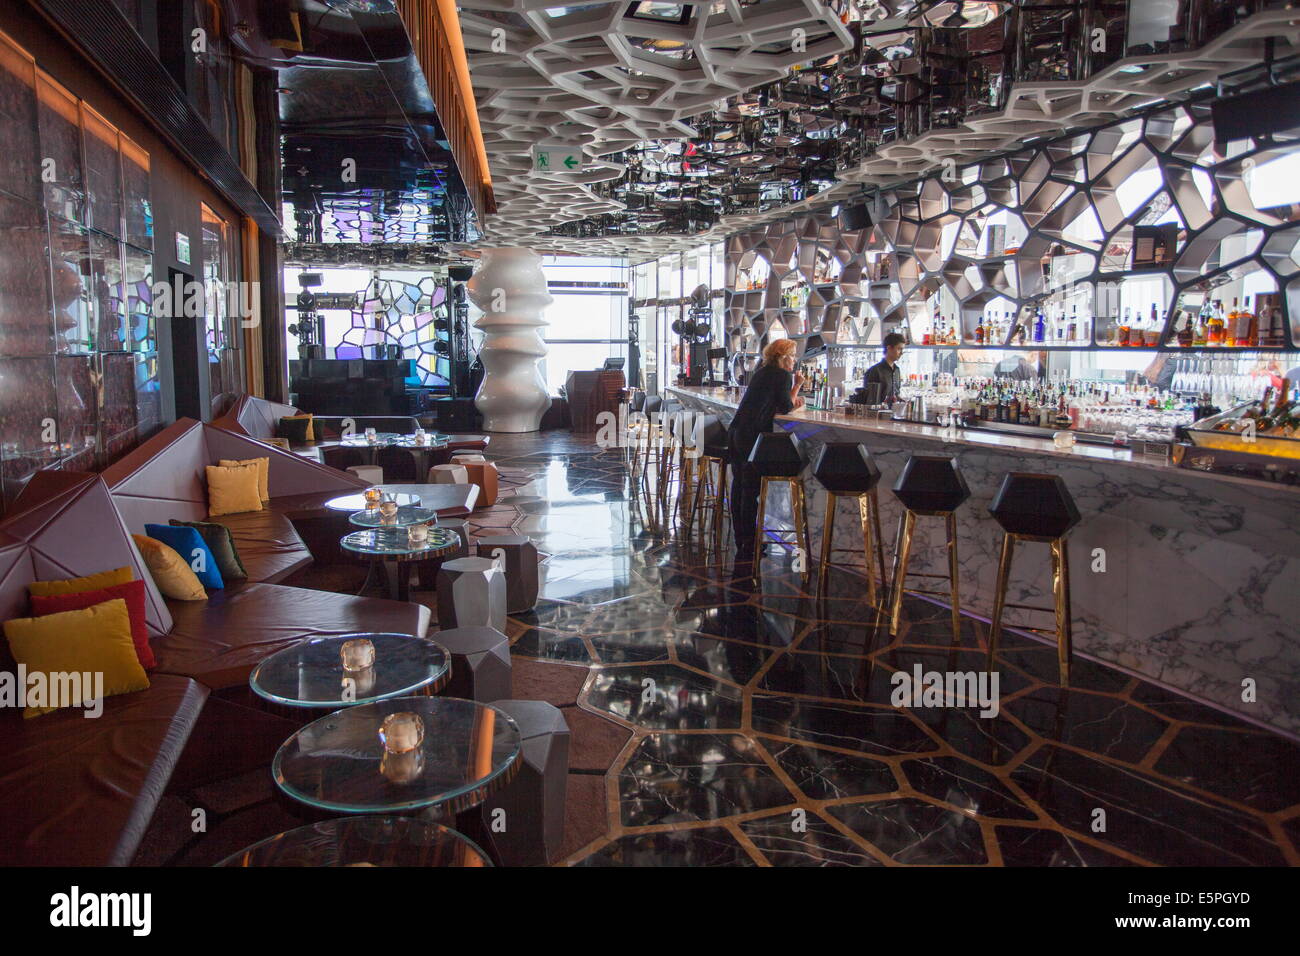 Ozone bar (highest in the world) in Ritz Carlton inside ICC, Kowloon, Hong Kong, China, Asia Stock Photo